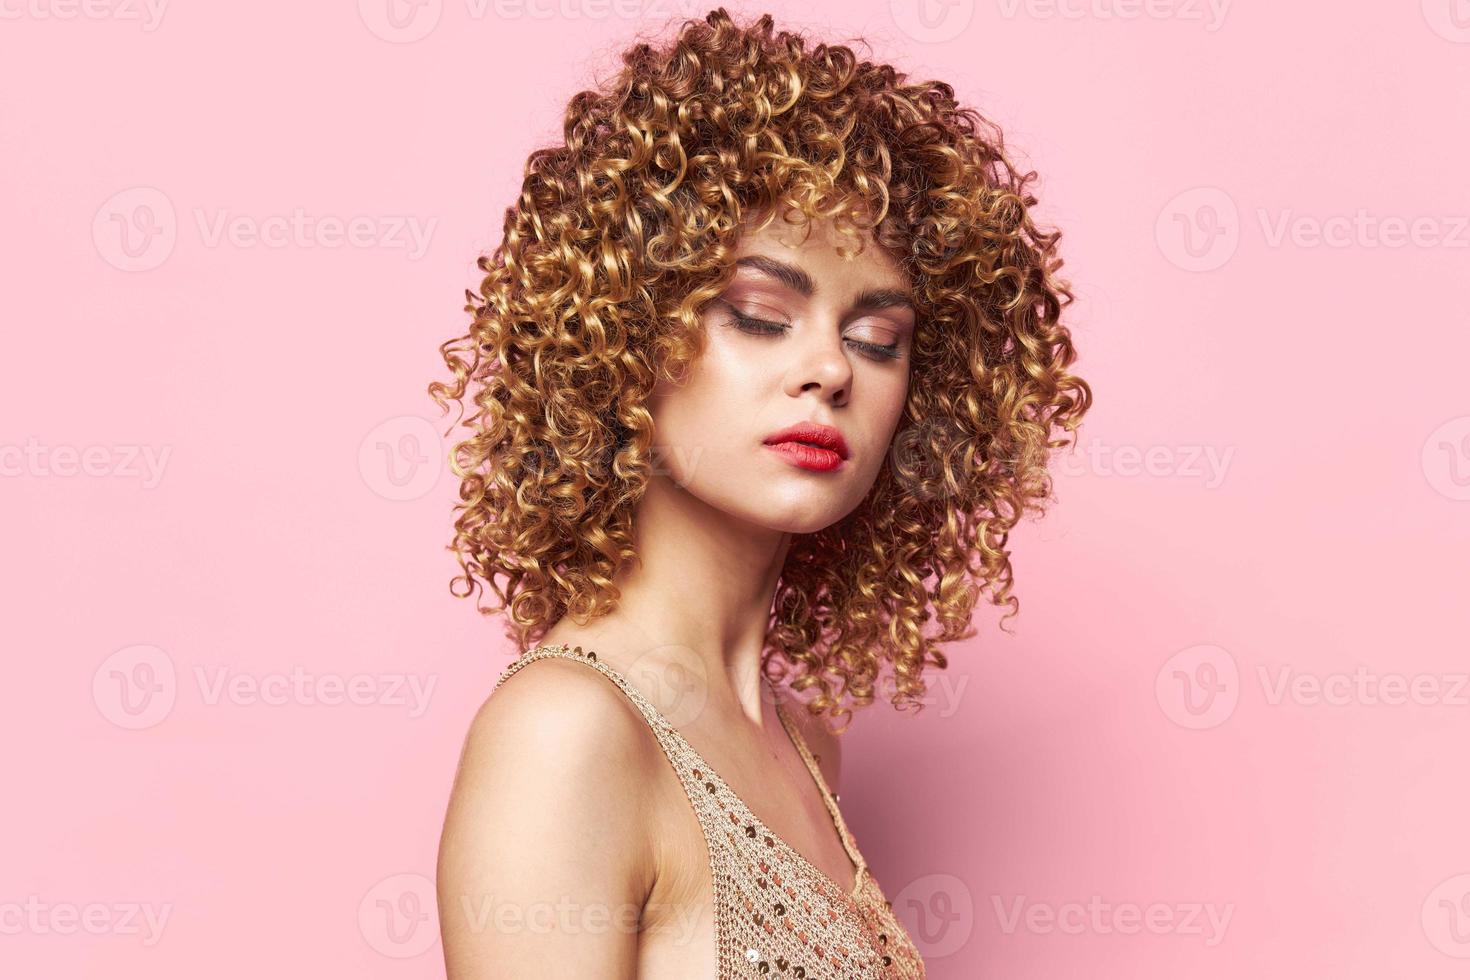 Beautiful woman Dress with sequins party disco makeup curly hair isolated background photo